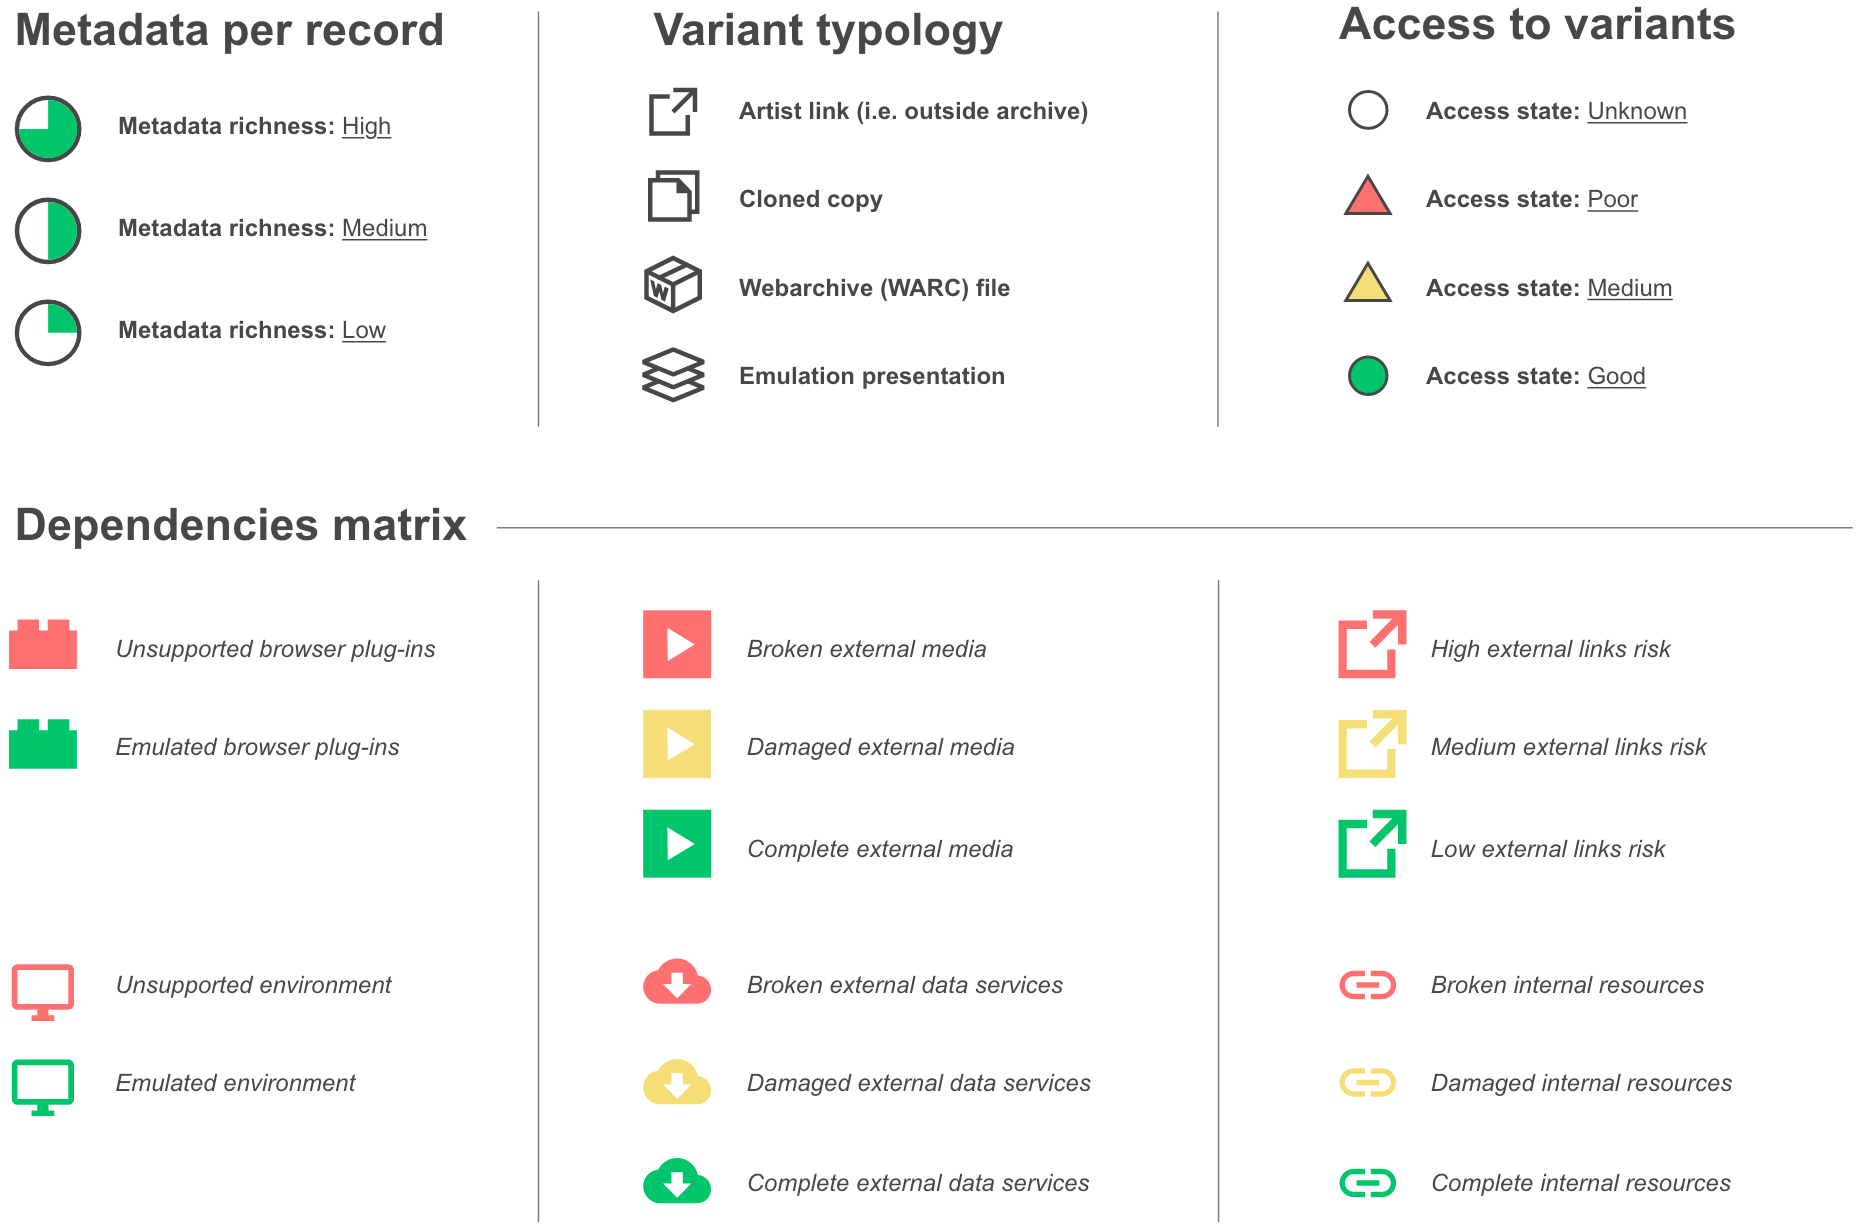 An overview of all icons used in the new ArtBase prototypes to denote access to different variants and state of their dependencies.